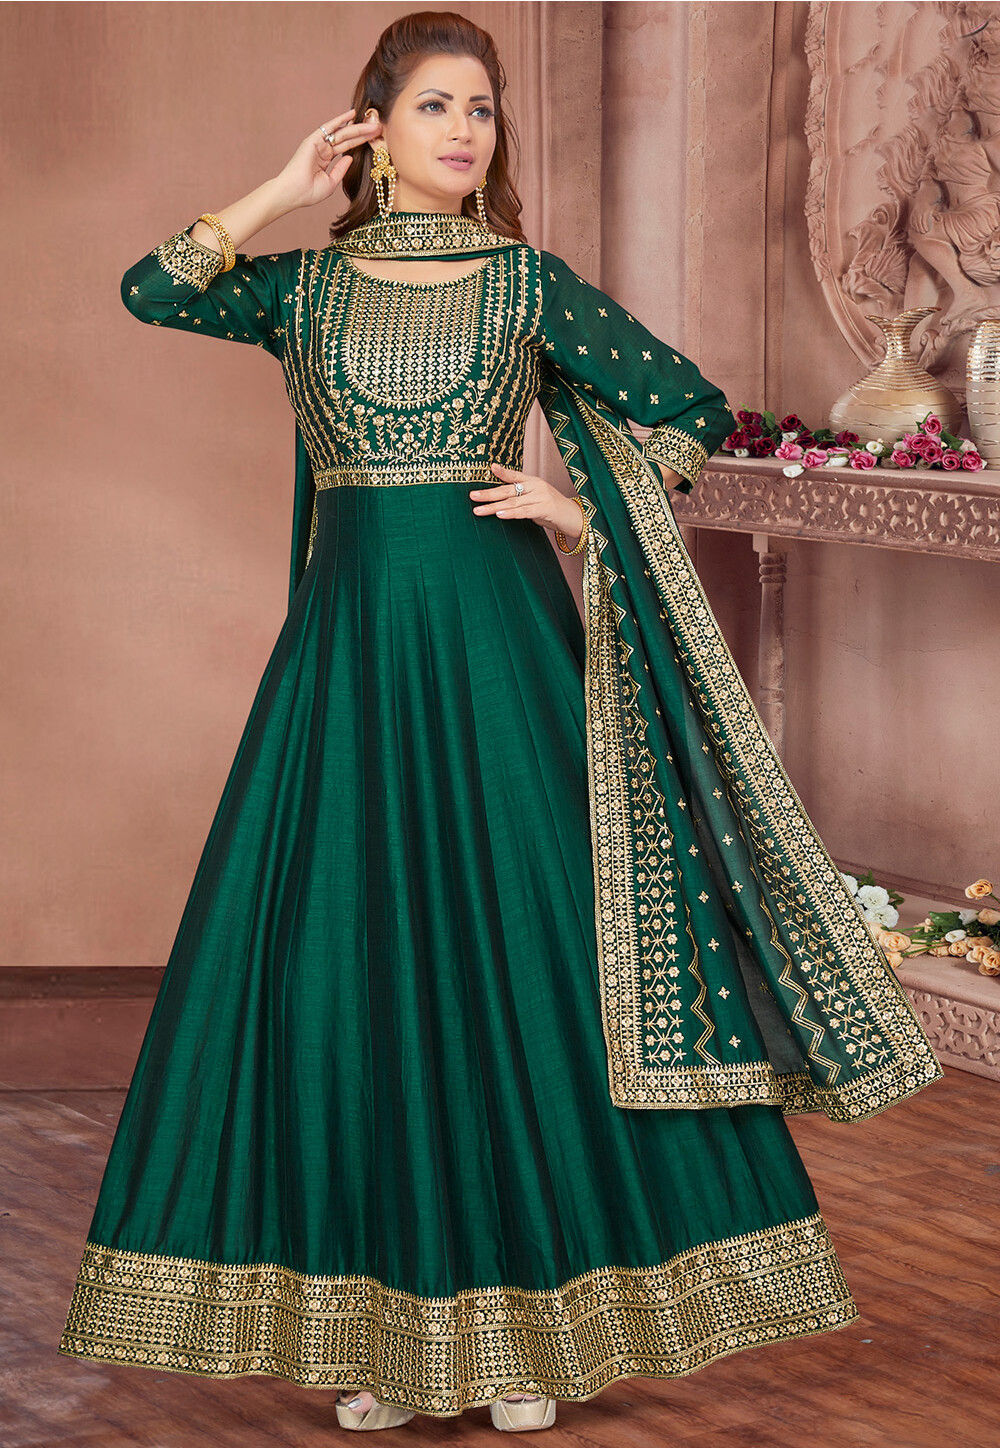 Party Wear Dark Green Color Embroidered Anarkali Salwar Suit In Fancy Fabric